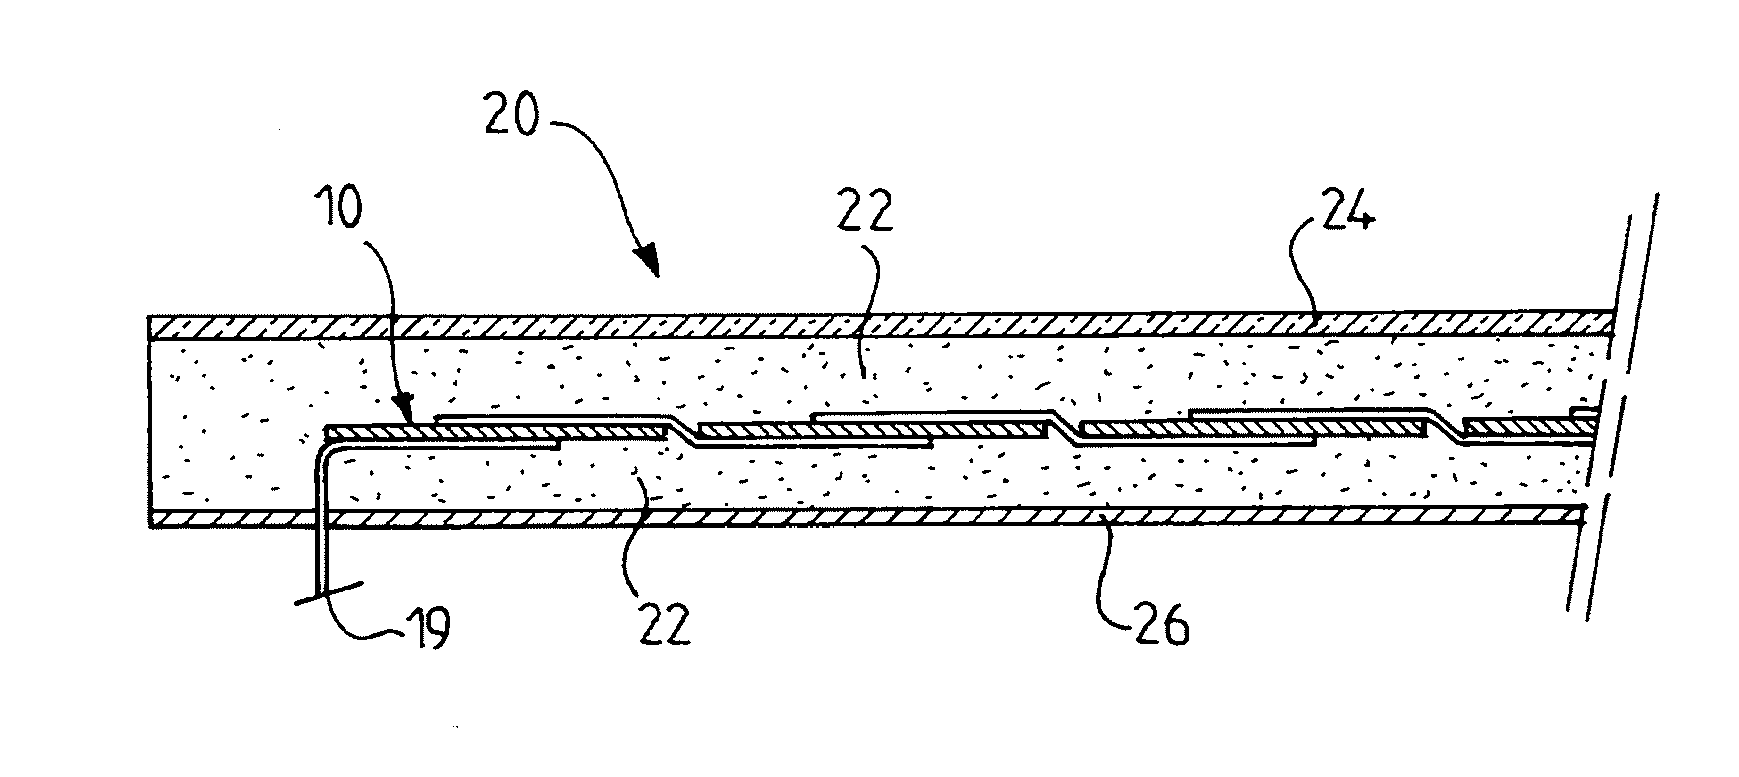 Double-layer film of a photovoltaic module